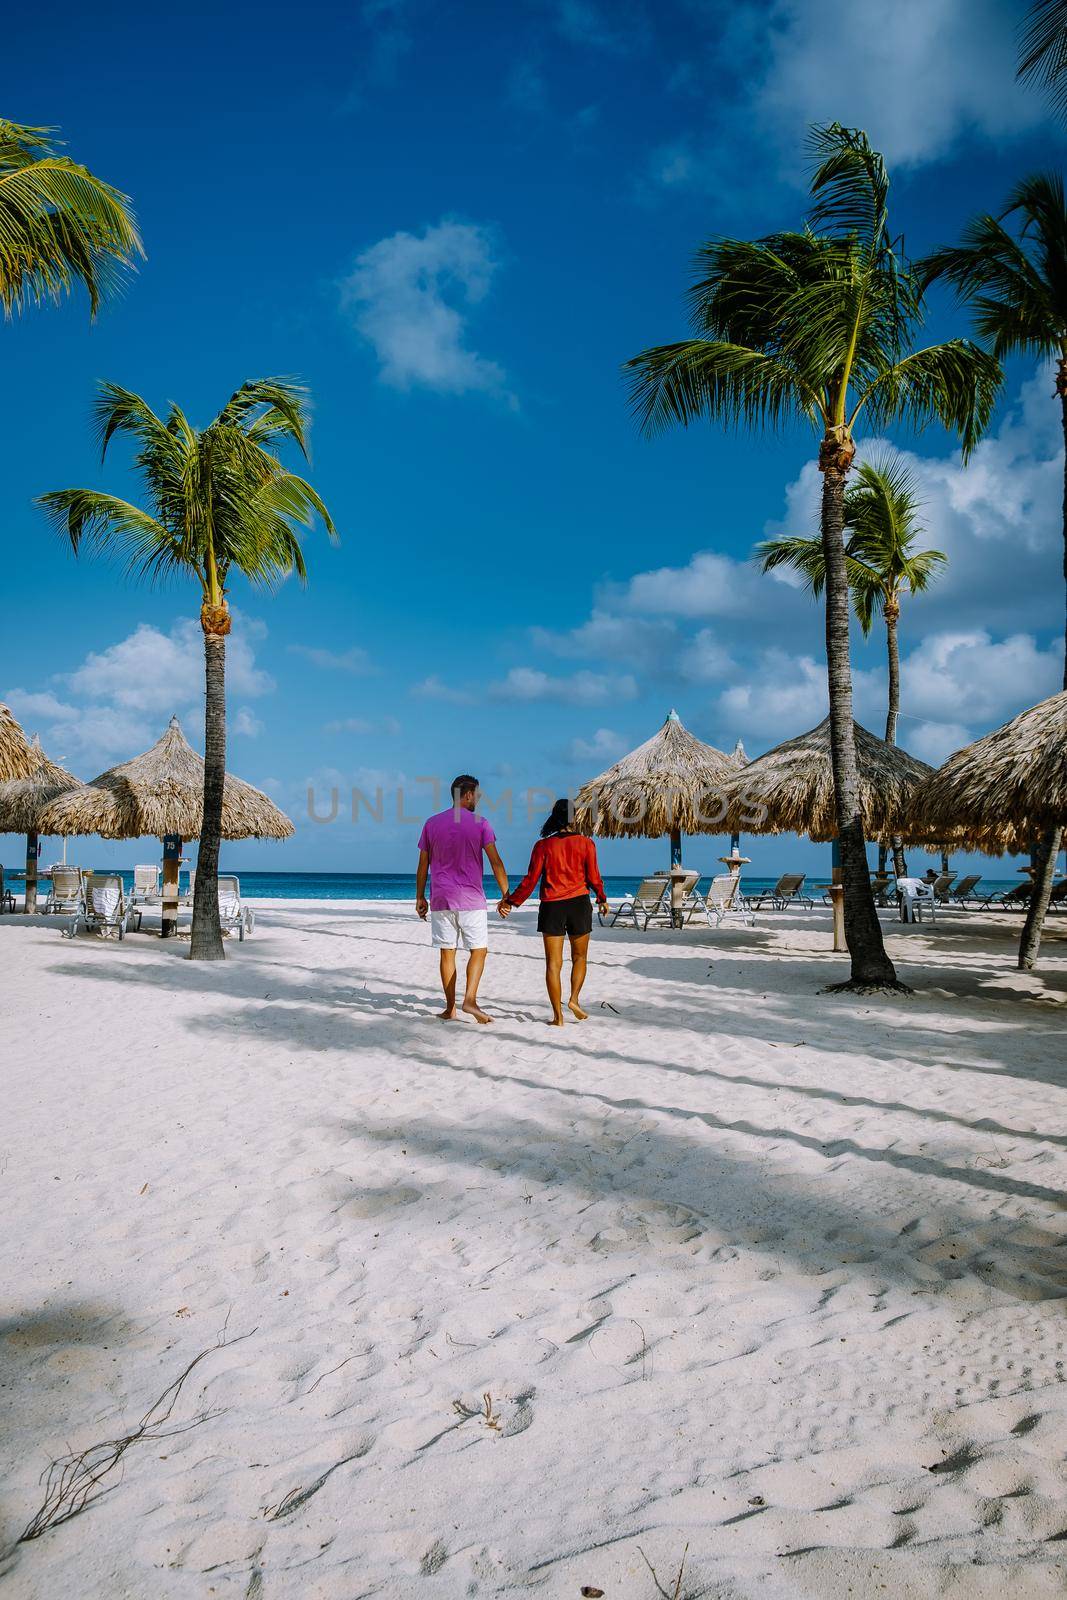 Palm Beach Aruba, Amazing tropical beach with palm trees entering the ocean against azur ocean, gold sand, and blue sky. man and woman walking at a white beach, mid age couple